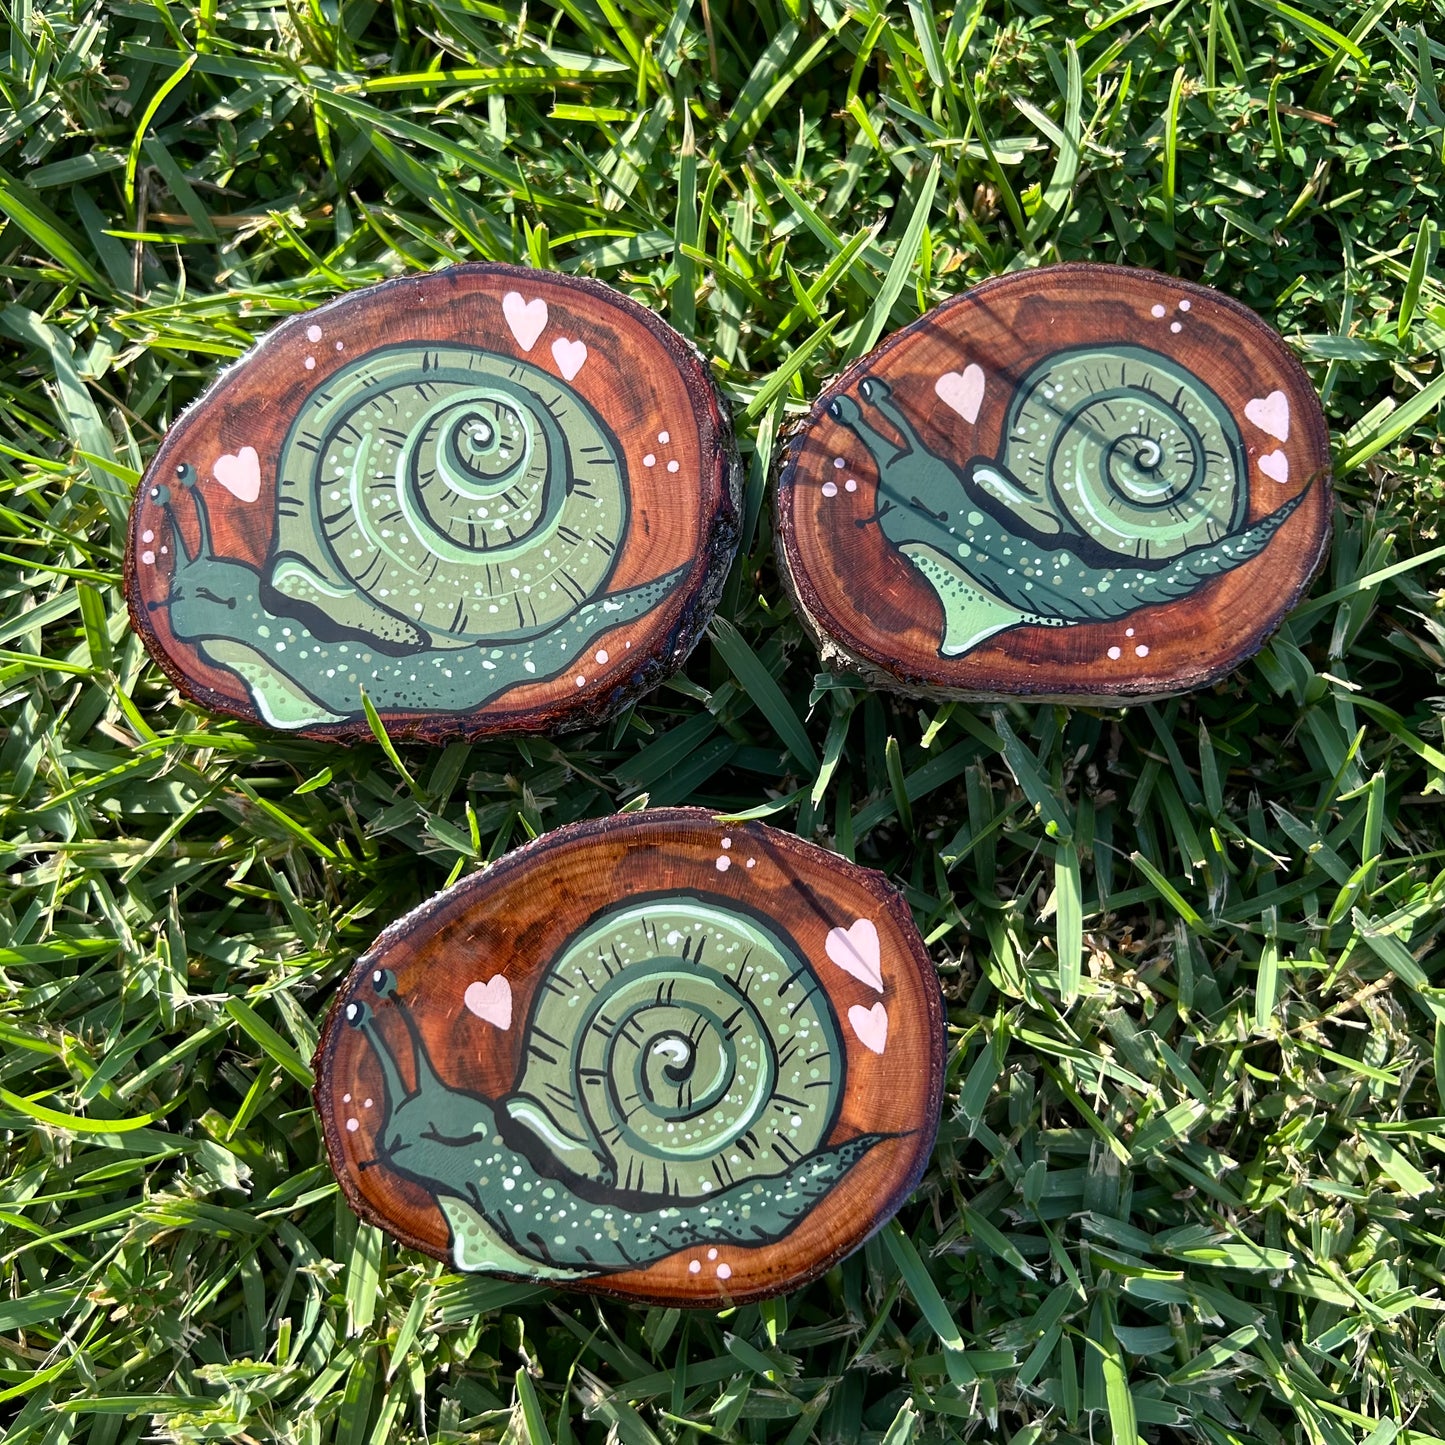 Hand-Painted Snail Artwork on Recycled Wood Slice